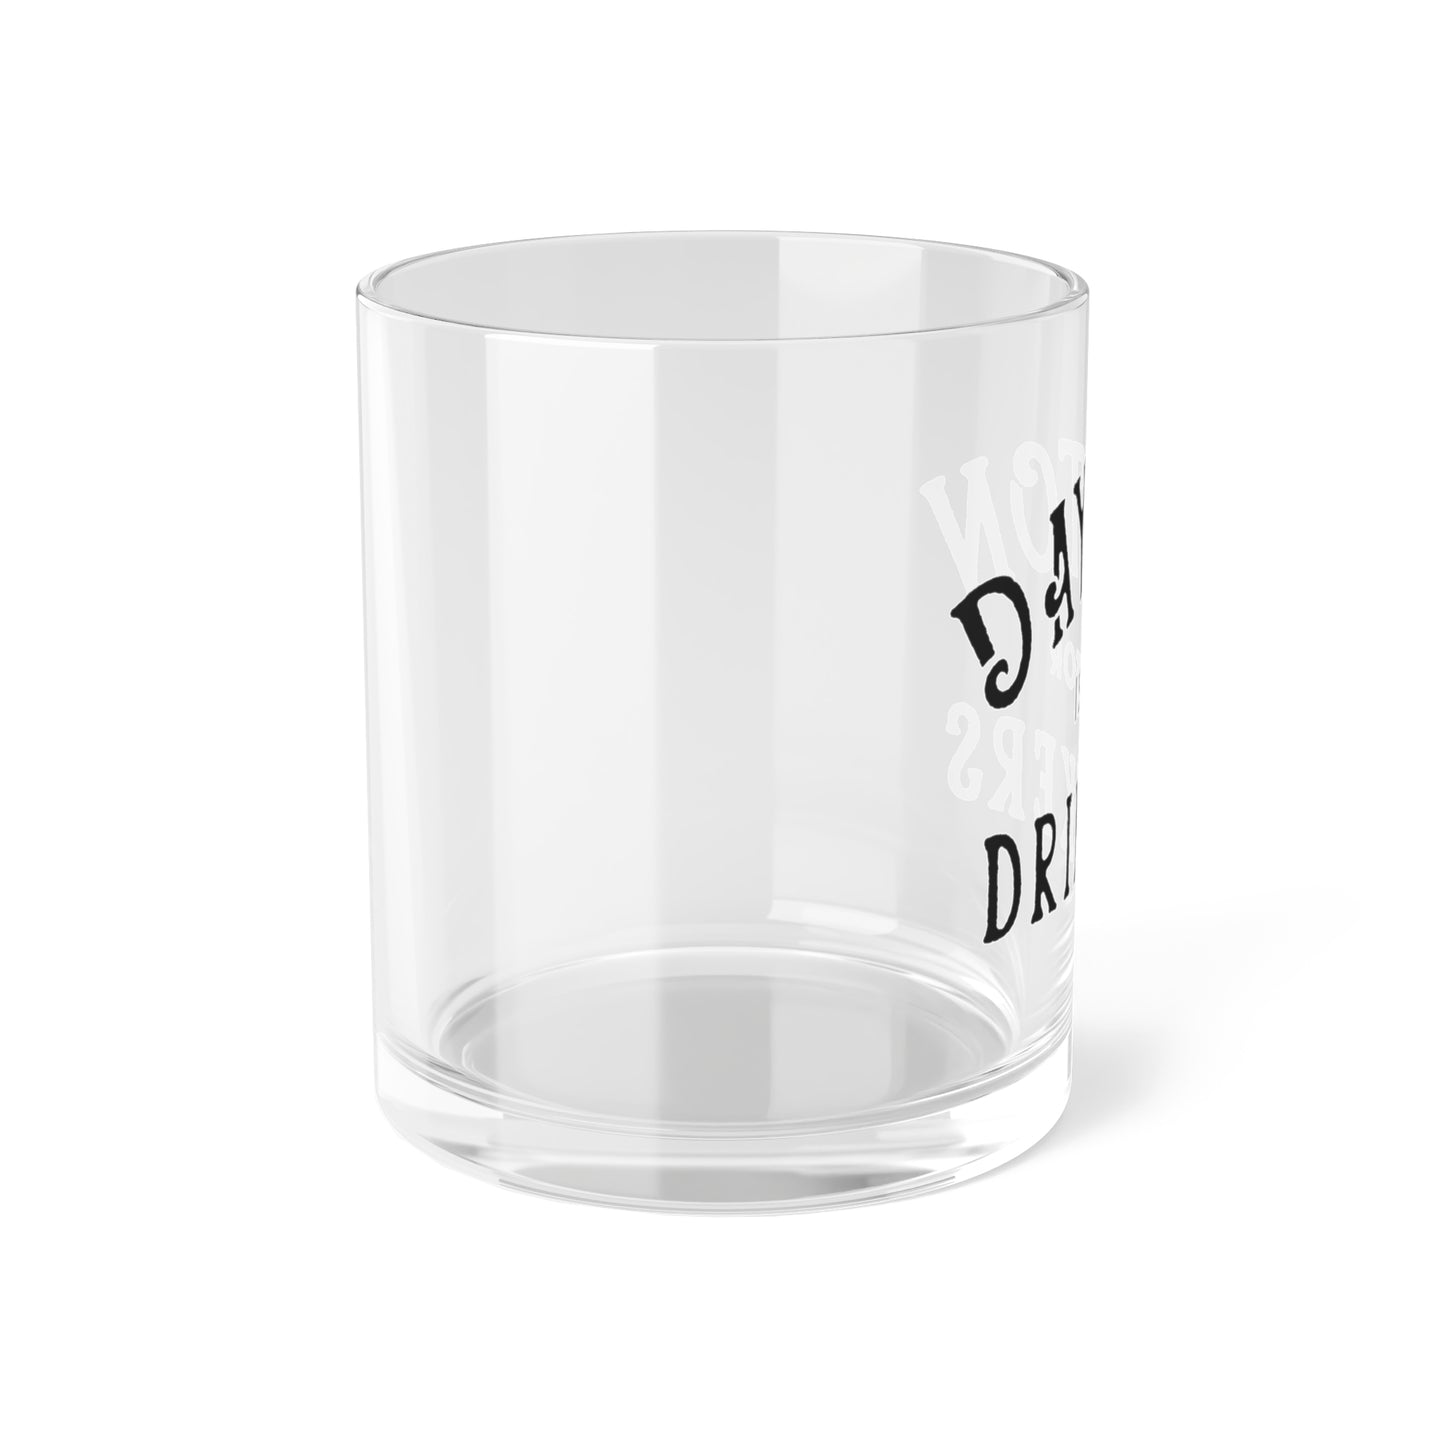 Dayton Is For Drinkers Bar Glass